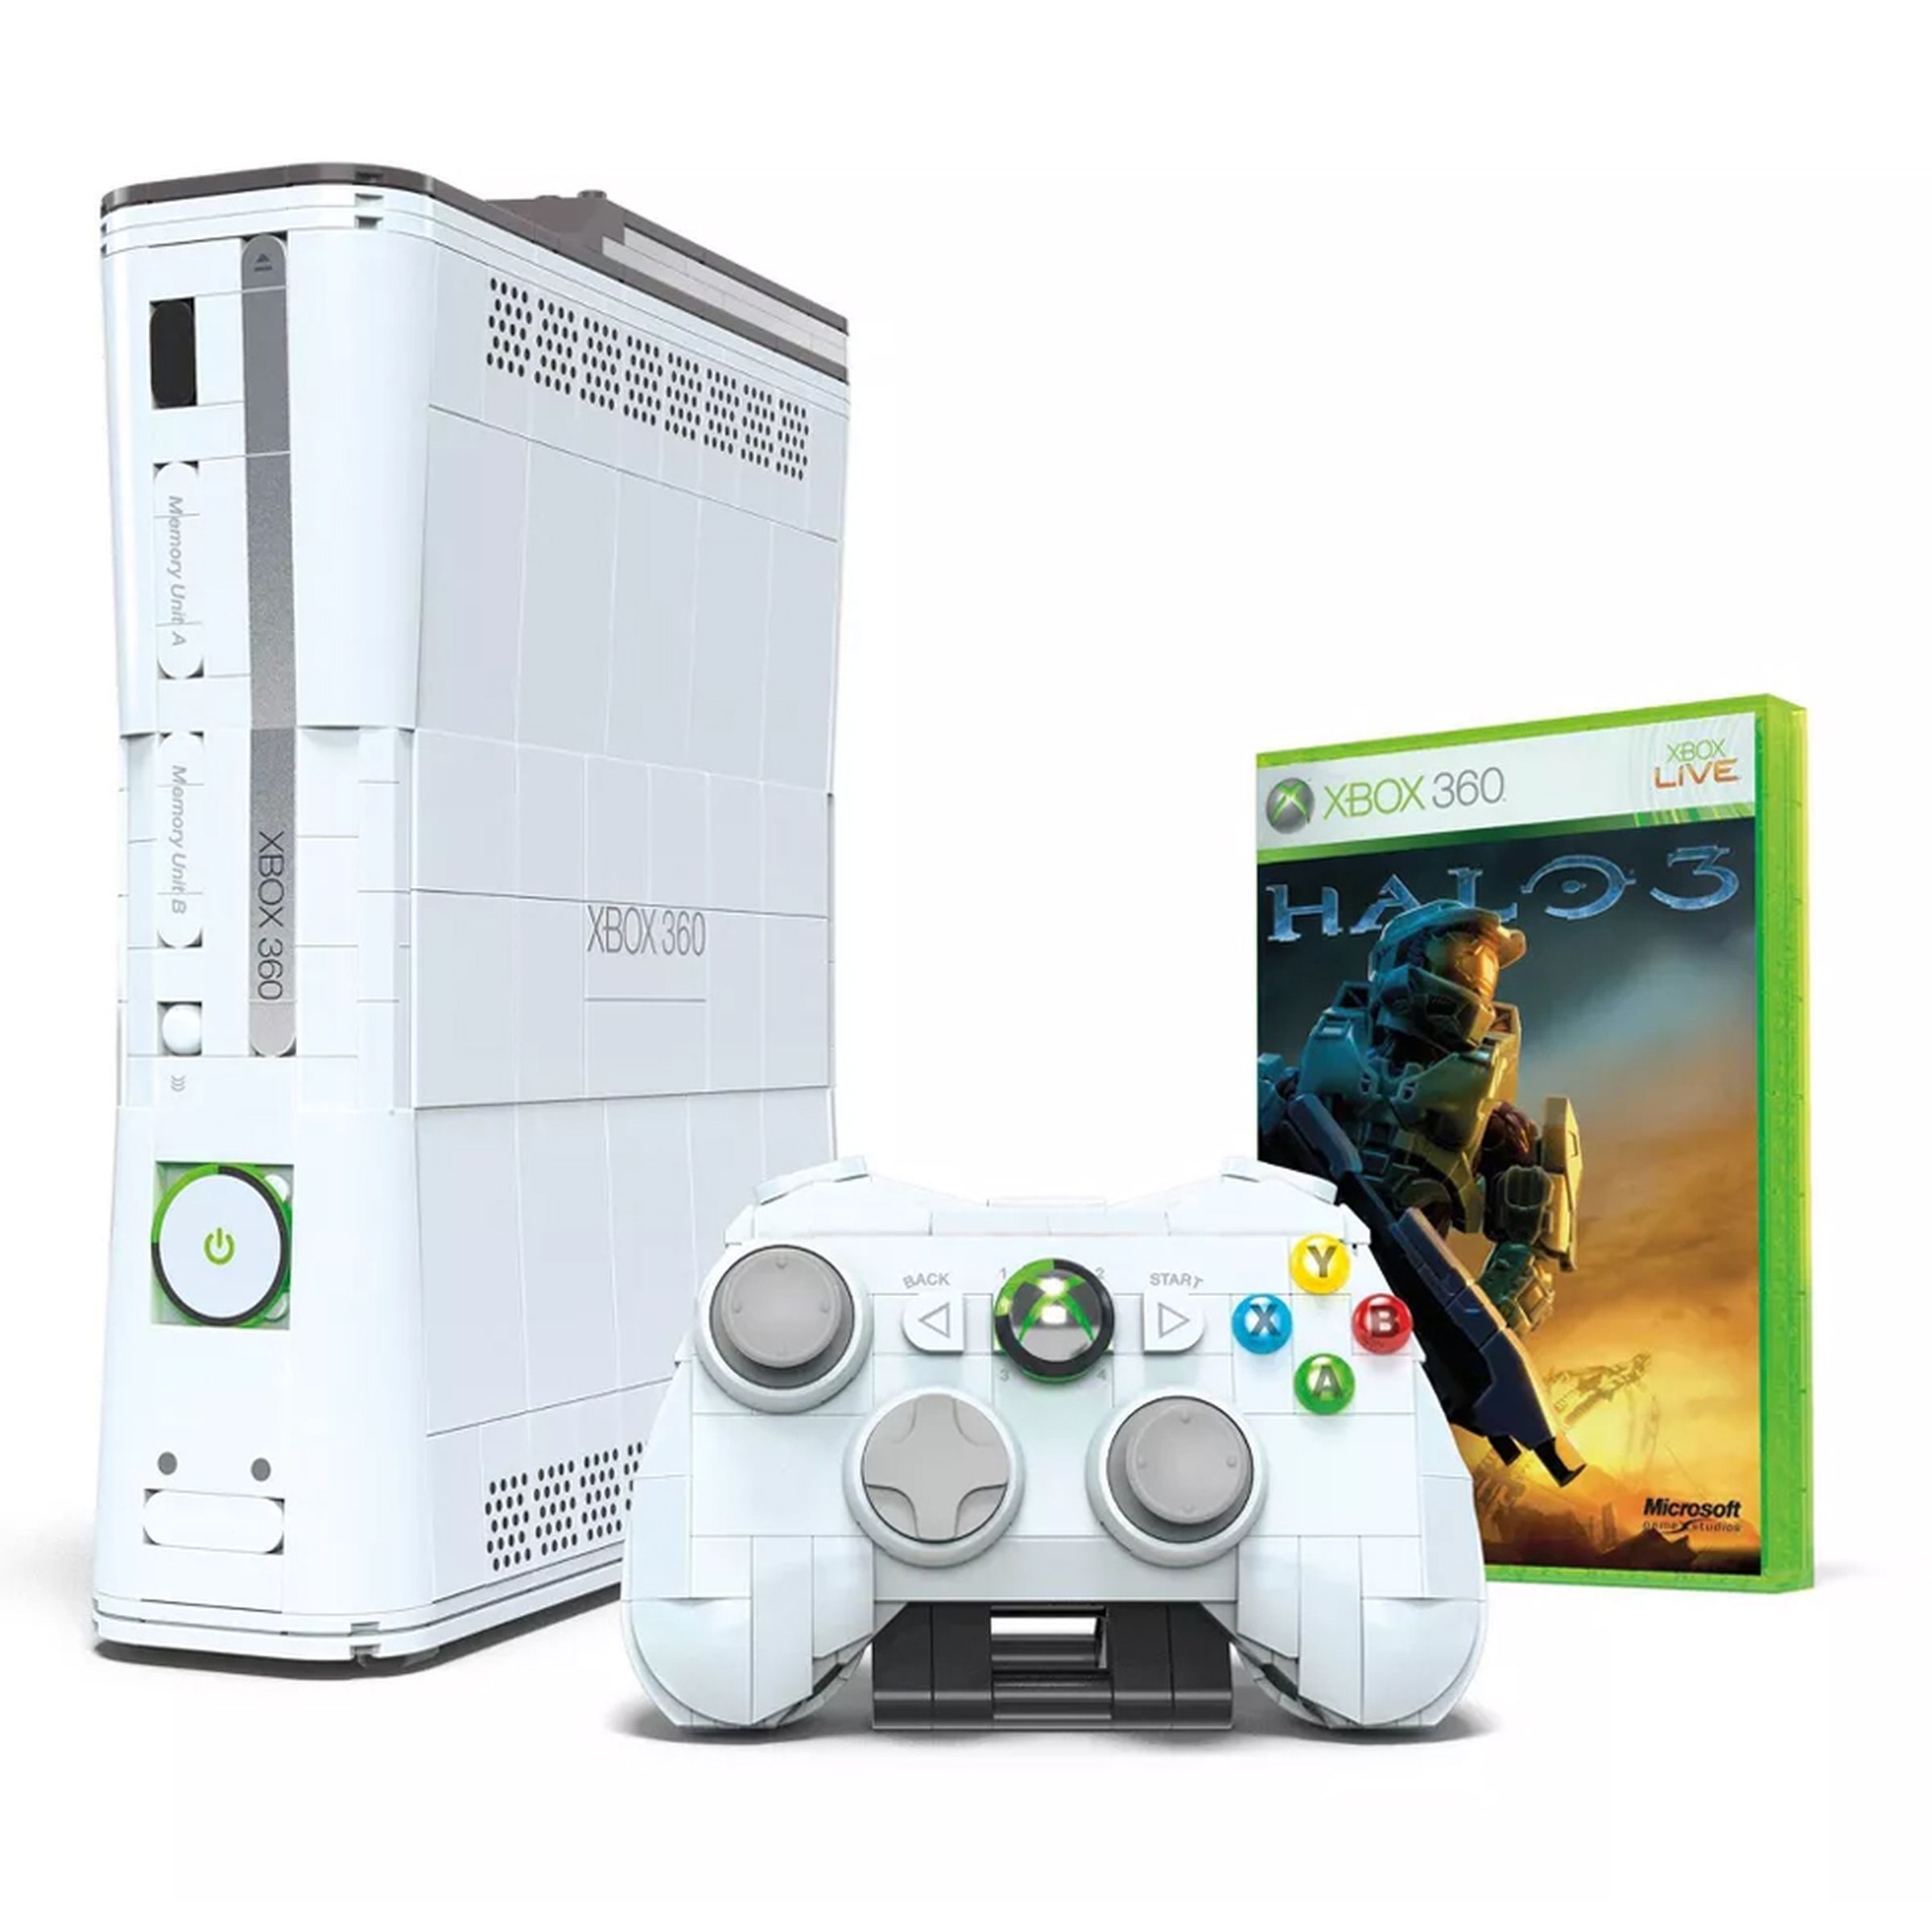 A close-up image of Mattel’s Xbox 360 replica on a white background.